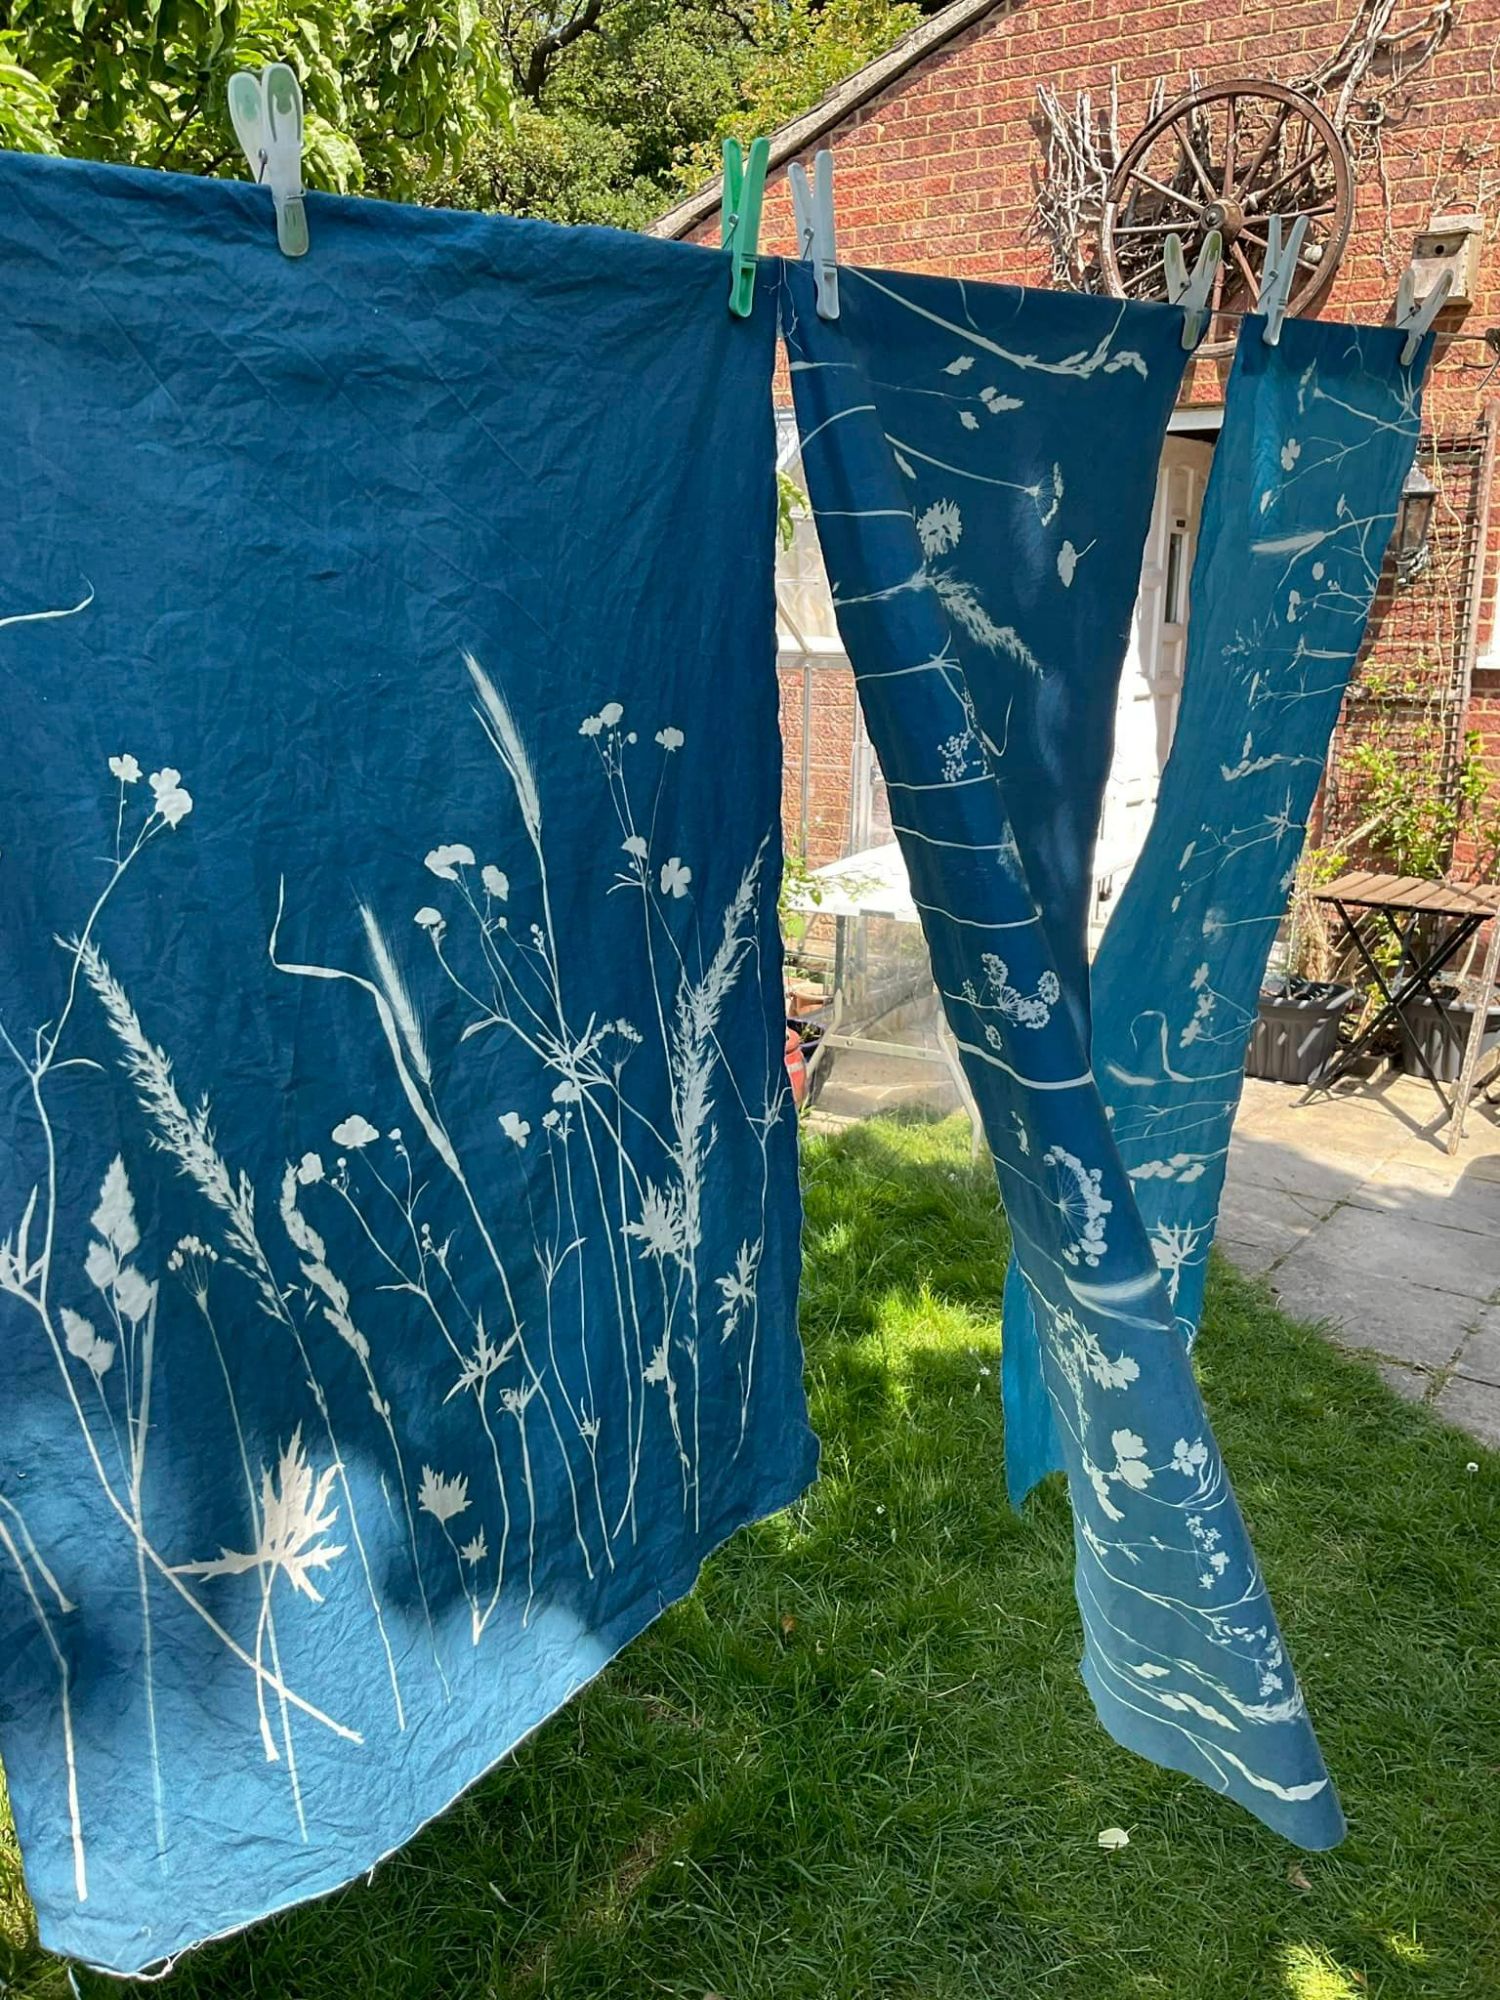 Three pieces of fabric are pegged on a washing line. The blue fabric has grasss and flowers sunprinted on